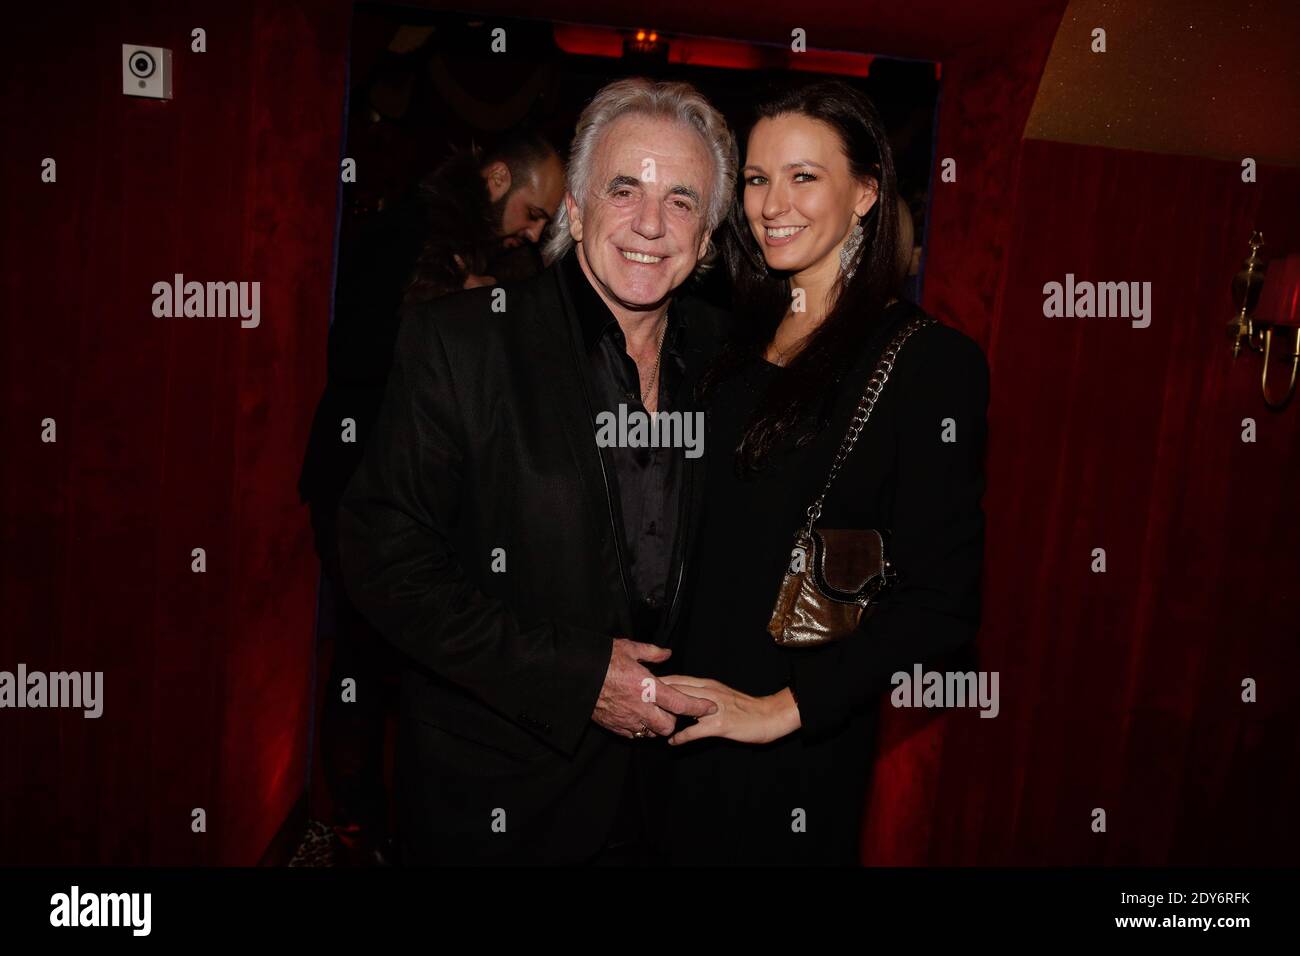 Peter Stringfellow attending and his wife attending the New 'Stringfellows' Opening party and Muratt Atik's Birthday, in Paris, France on November 27, 2014. Photo by Jerome Domine ABACAPRESS.COM Stock Photo